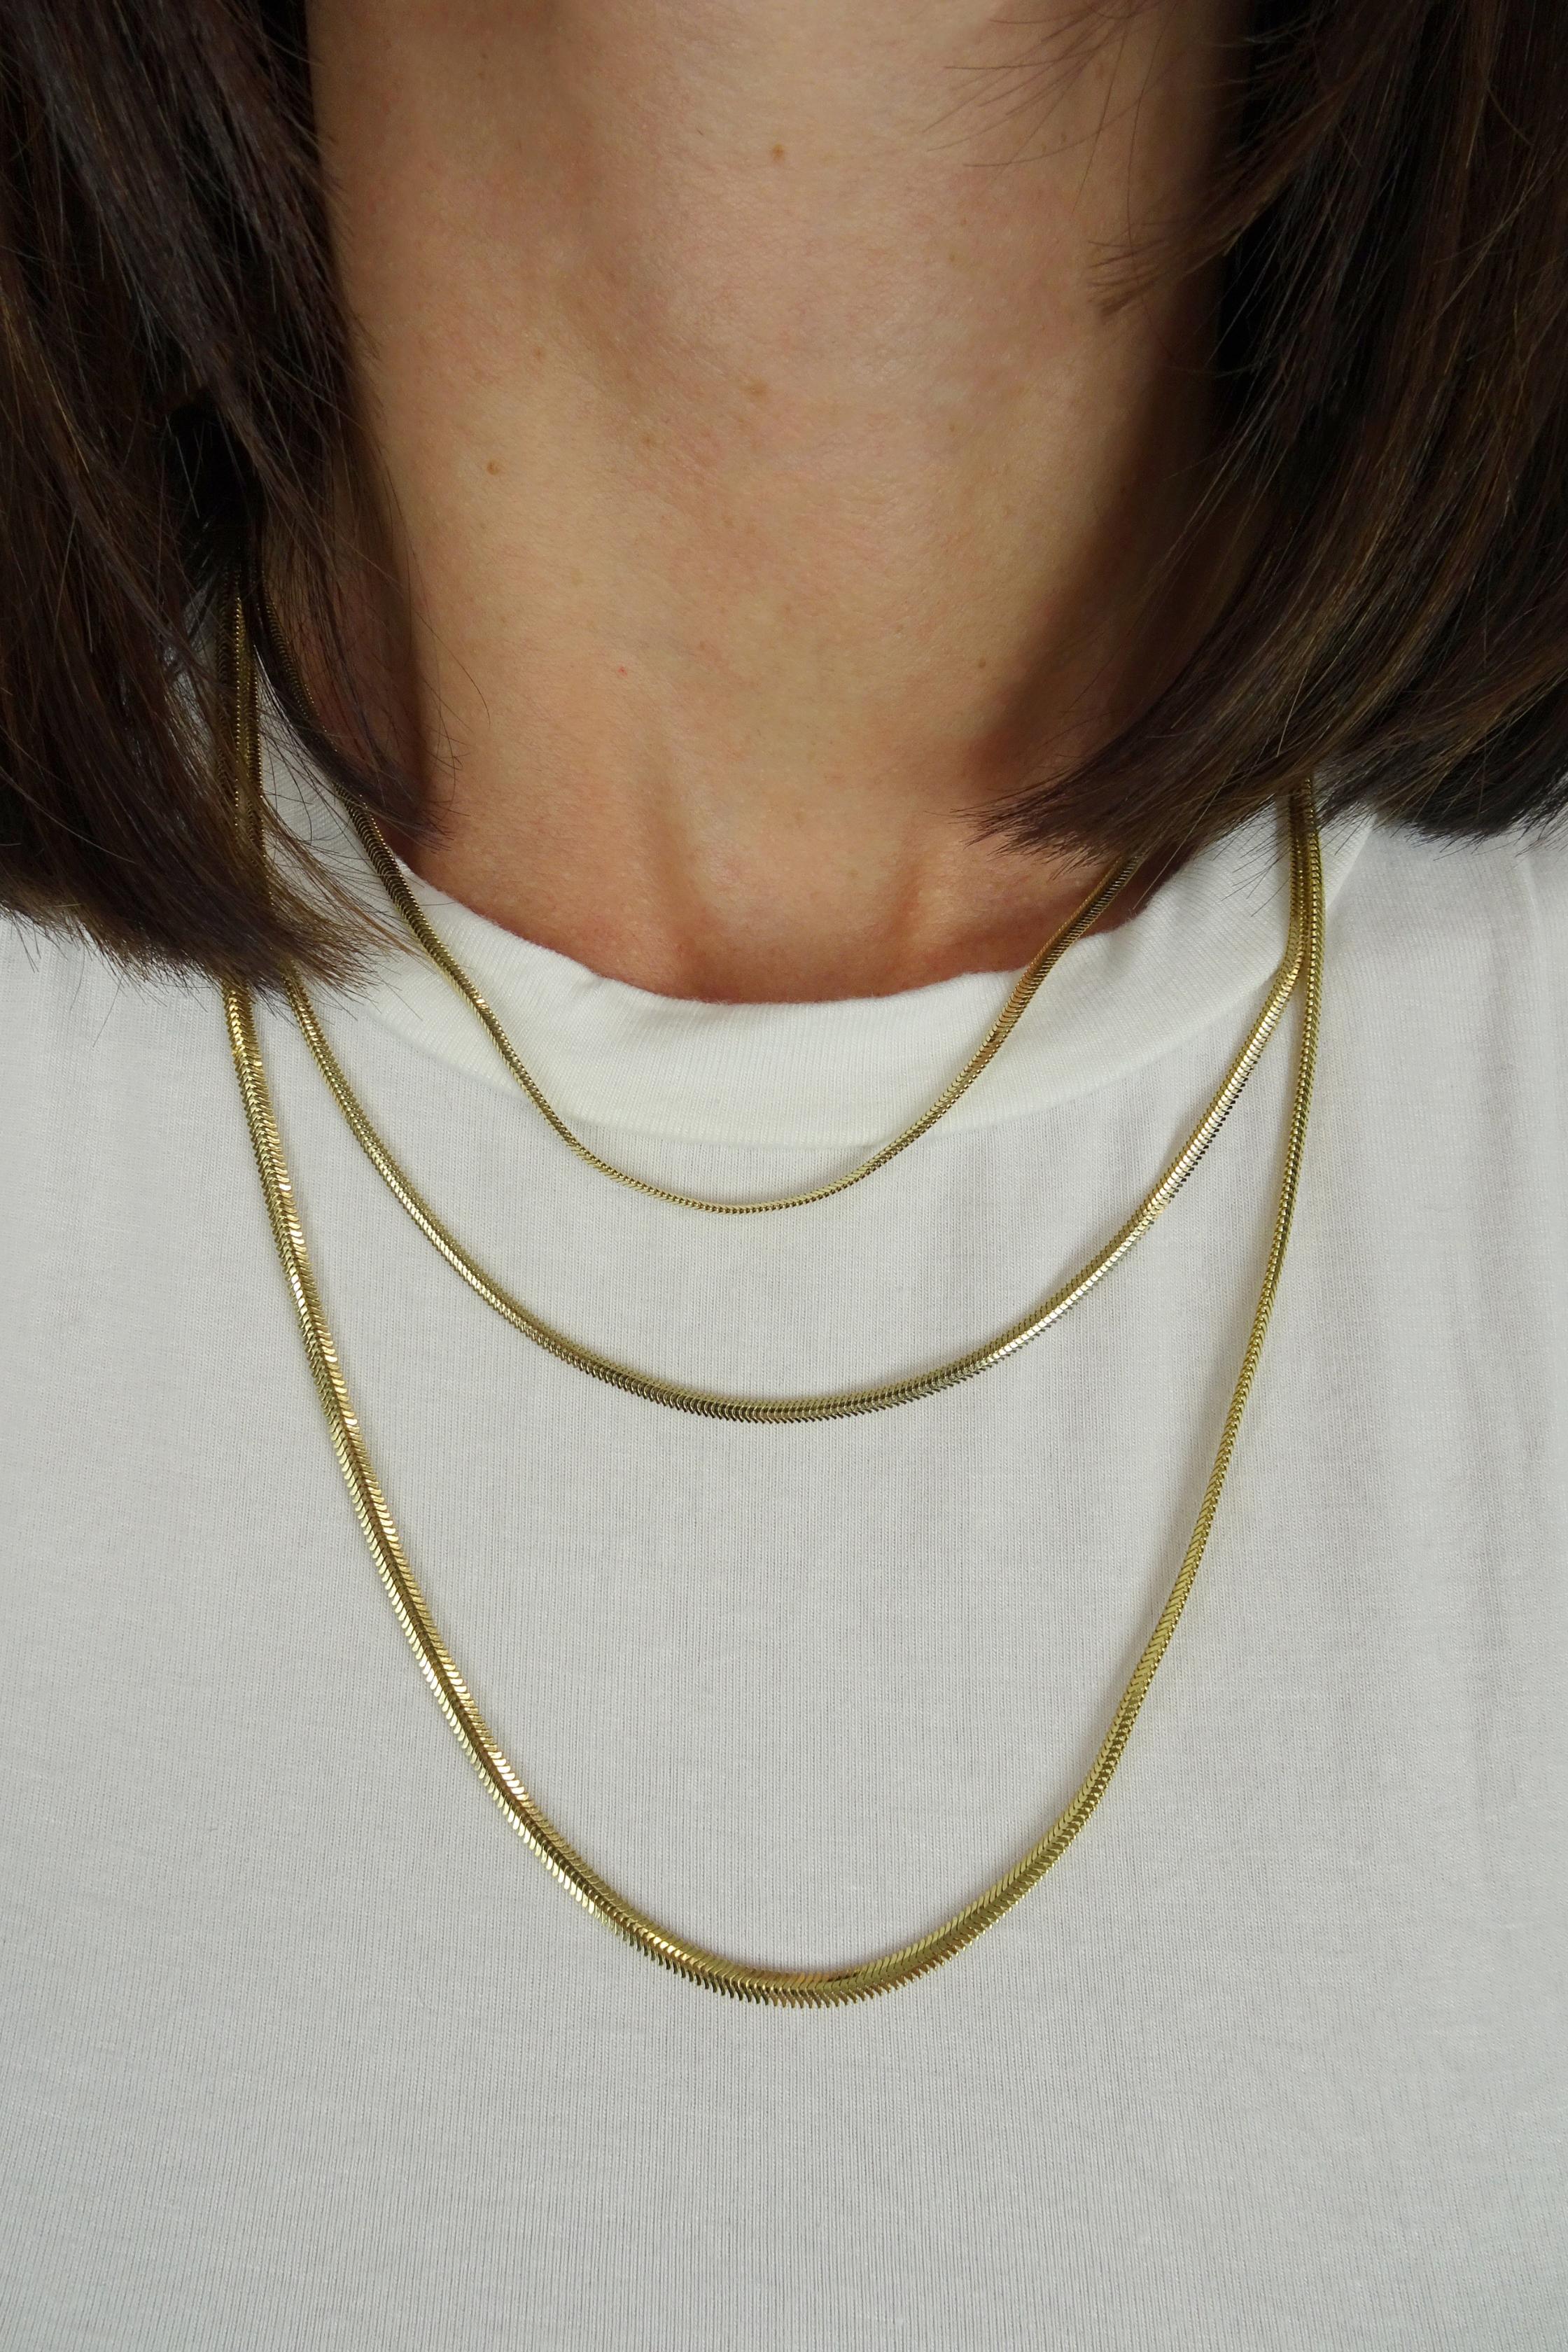 Thick Flat Chain Gold Necklace In New Condition For Sale In Jacksonville, FL